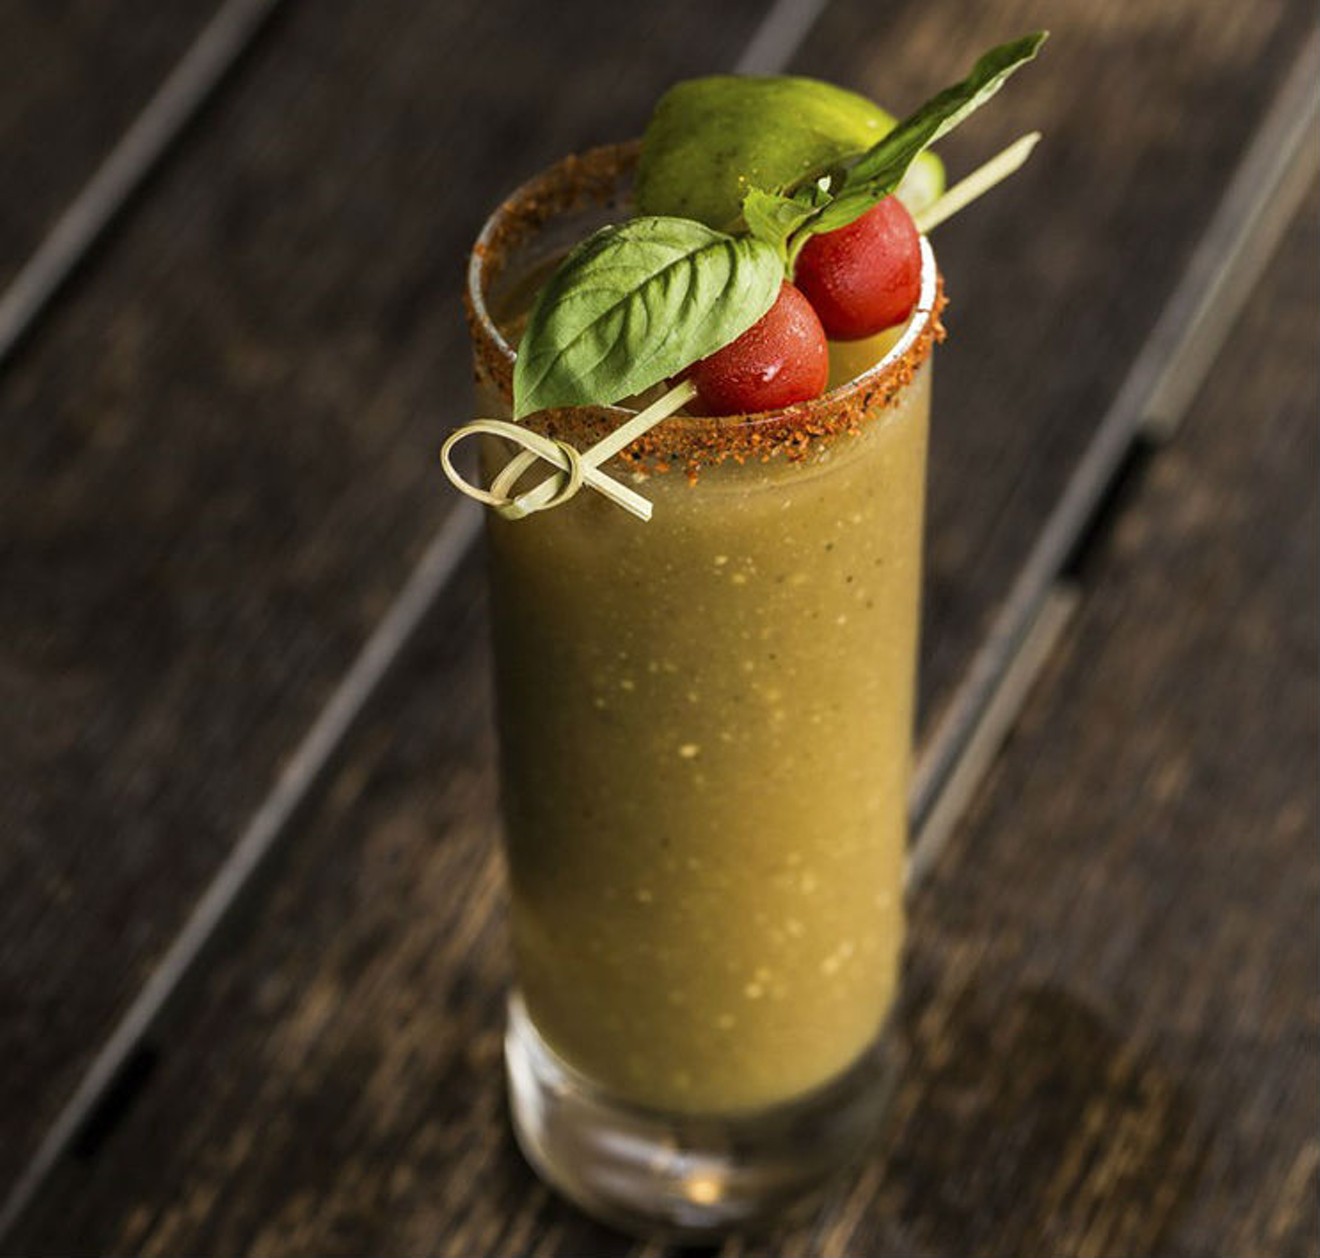 The Spicy Tomatillo Bloody Mary at IdleRye is a must-order.